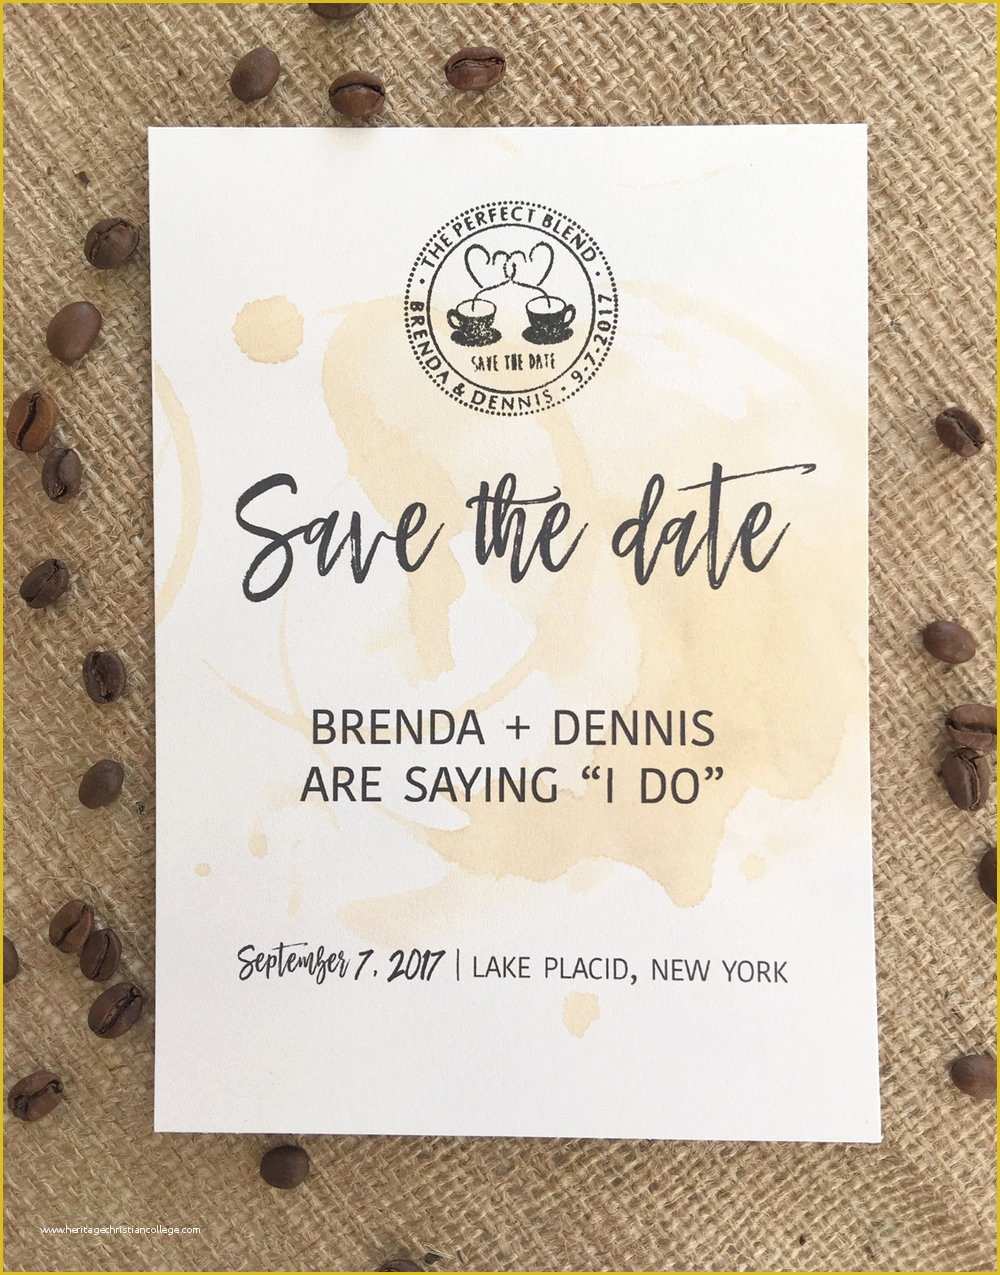 Save the Date Invitation Templates Free Of Save the Date Templates Free